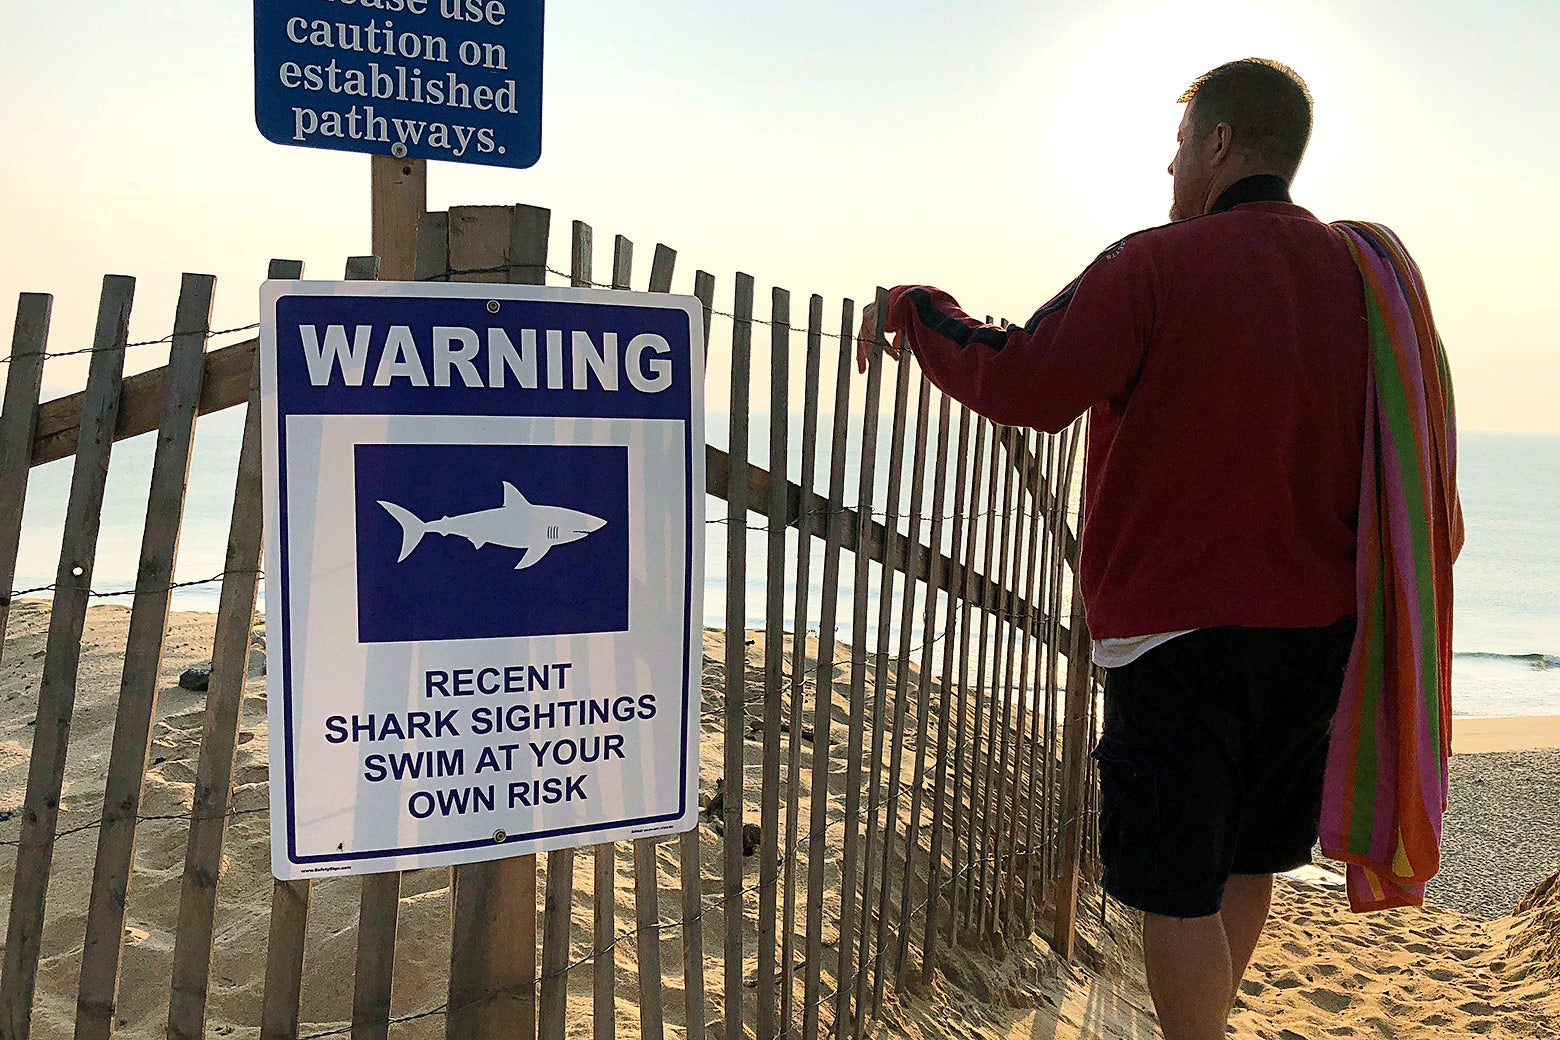 A shark warning sign is seen on a fence on a beach as a man stands looking out at the water.